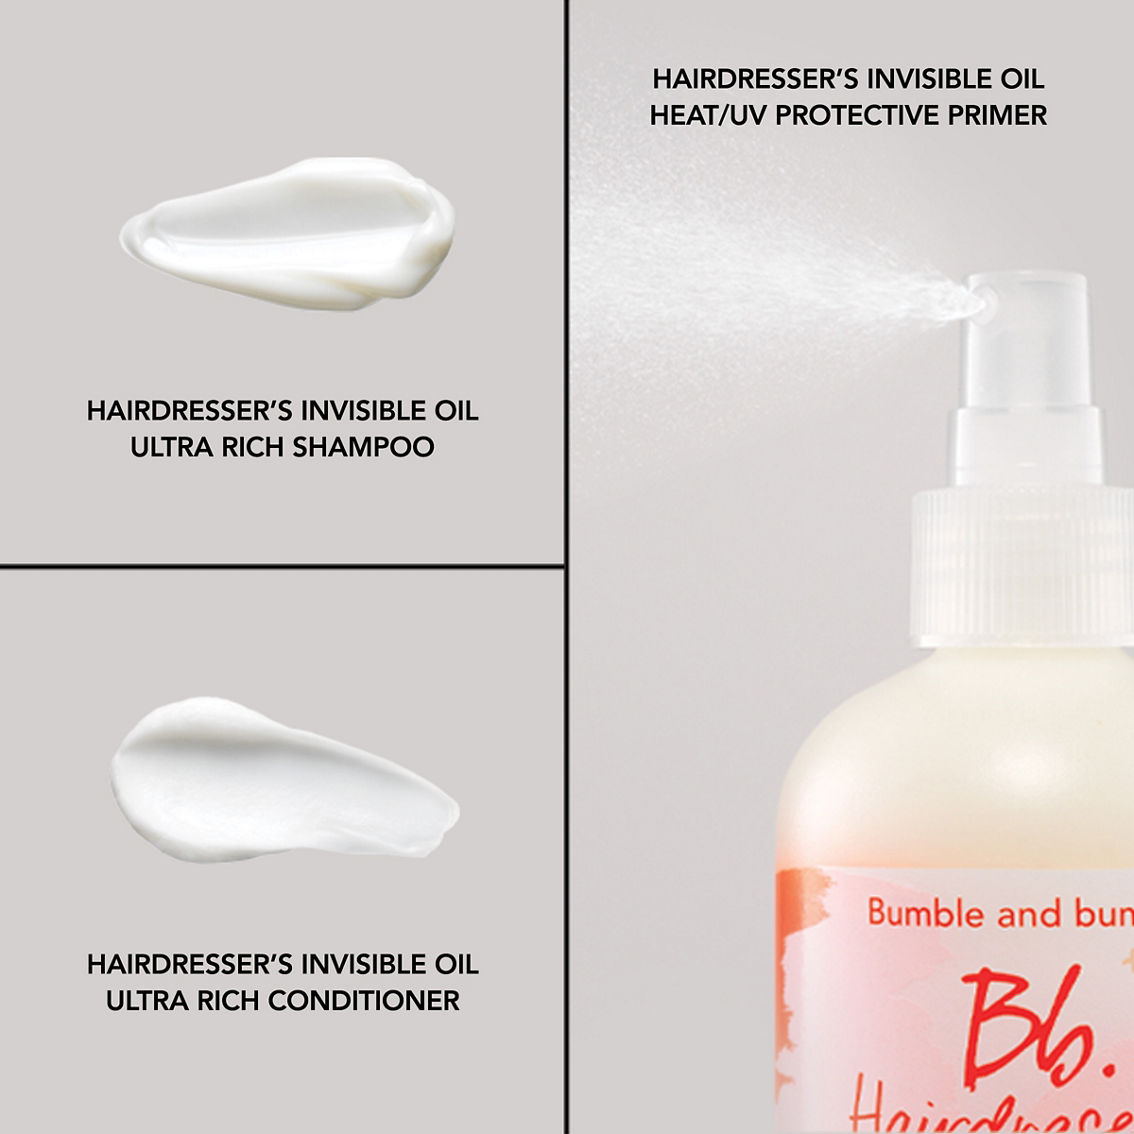 Bumble & Bumble Hairdresser's Invisible Oil Trial Set - Image 2 of 6